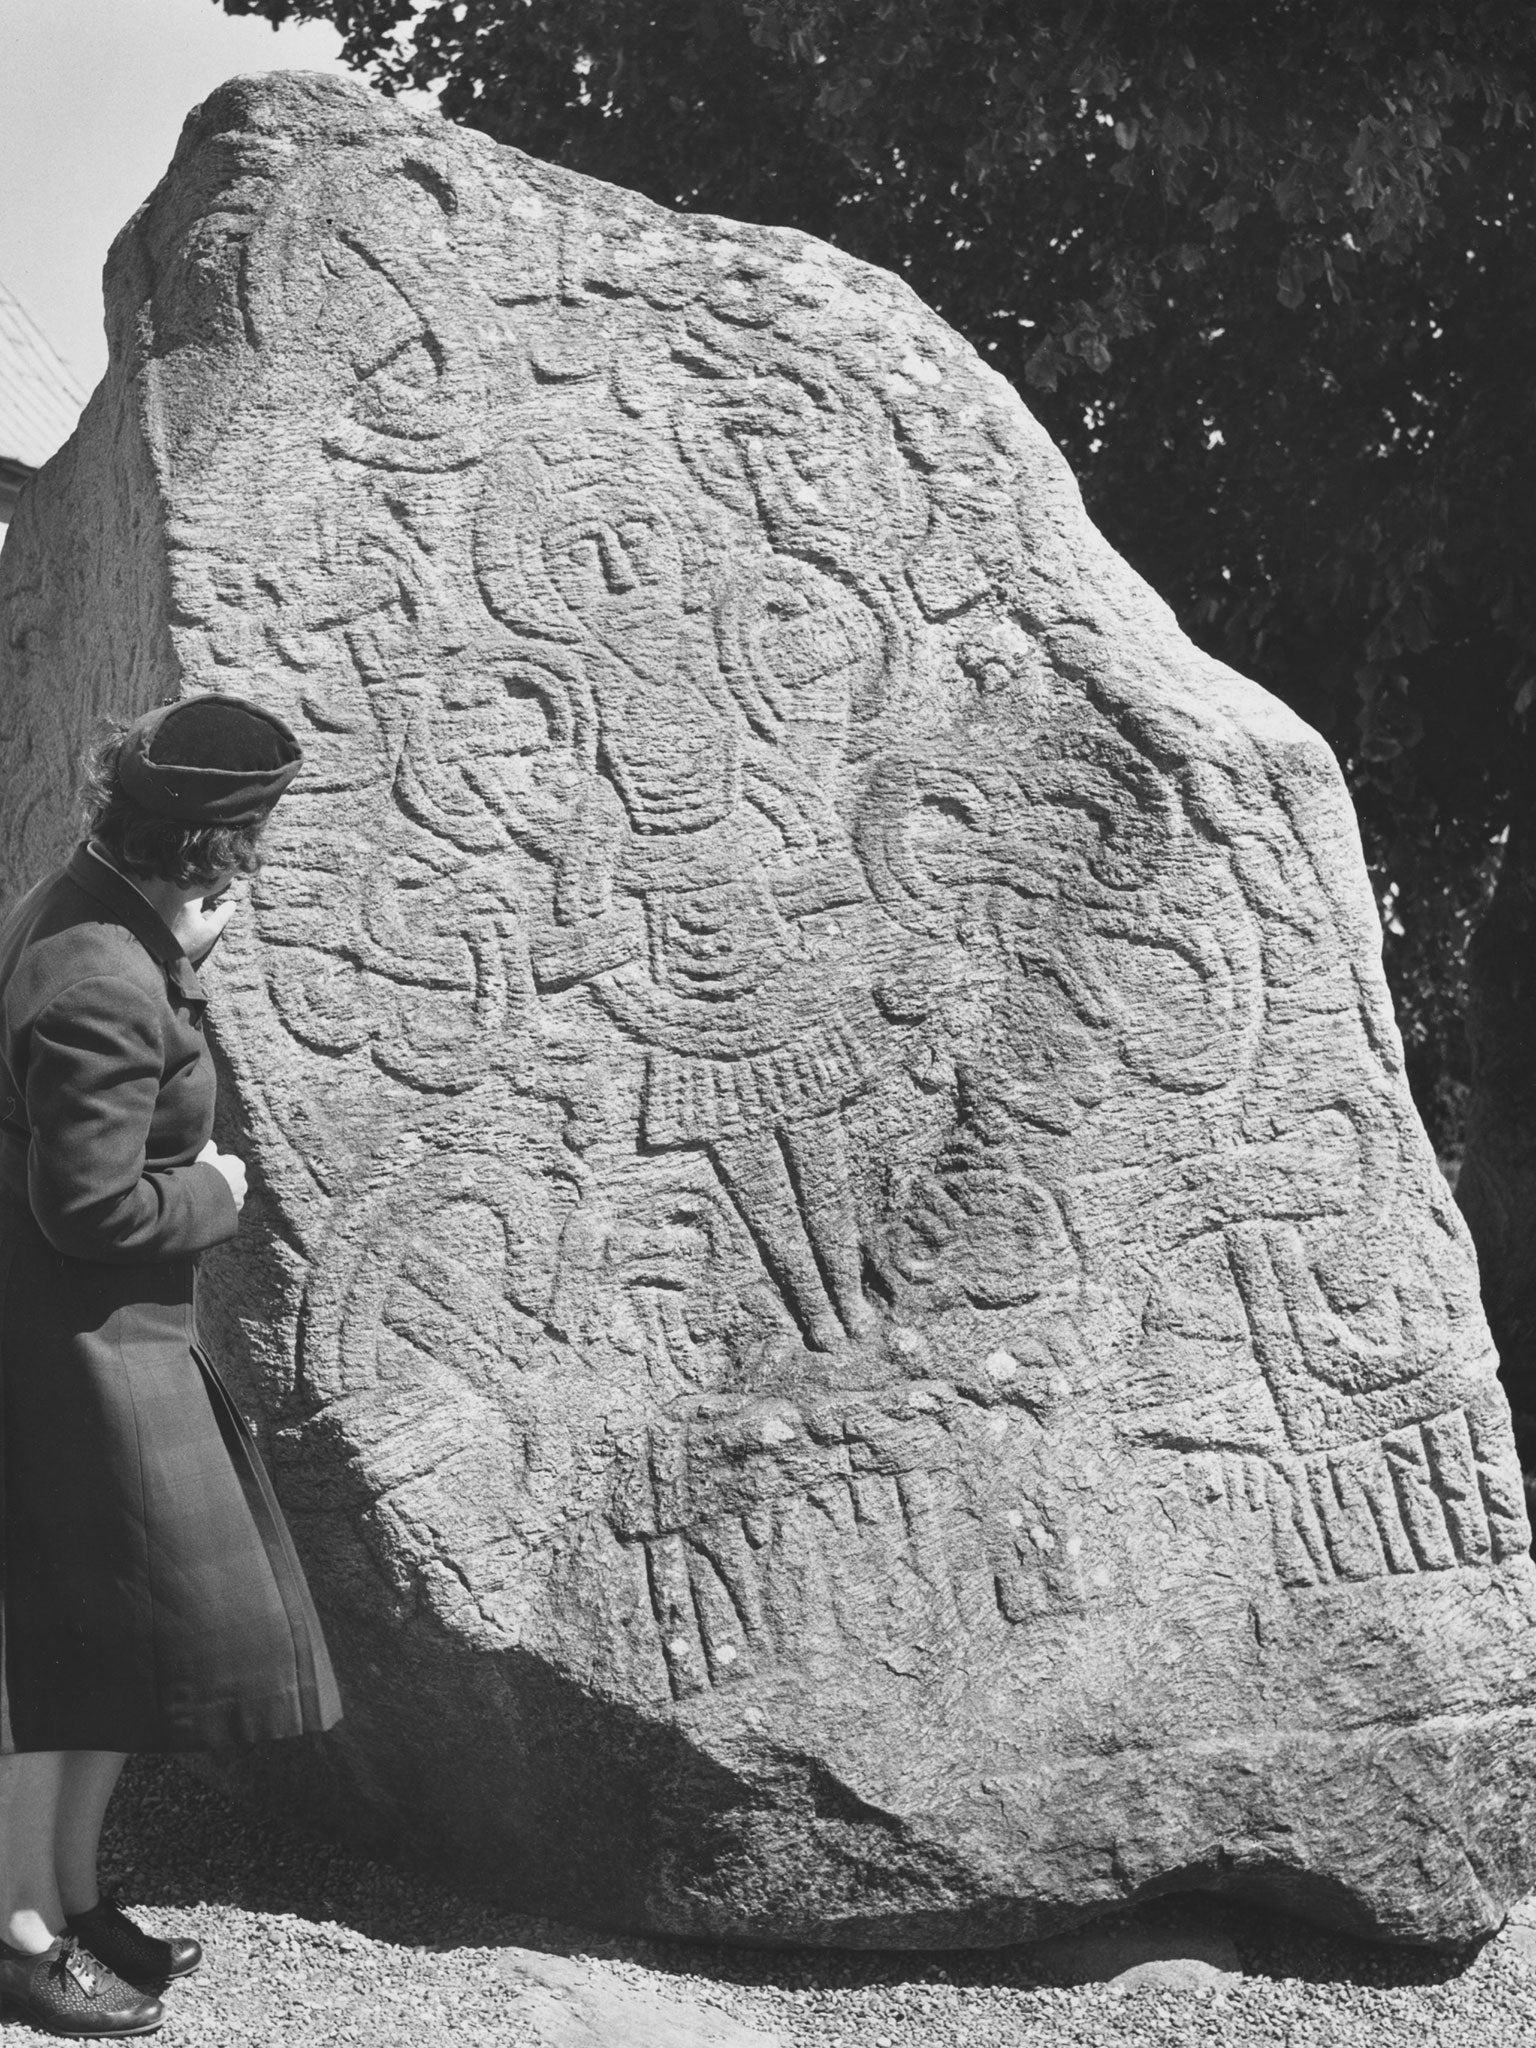 One of the rune stones at Jelling, Jutland. A figure with arms outstretched as if on a crucifix can be seen.